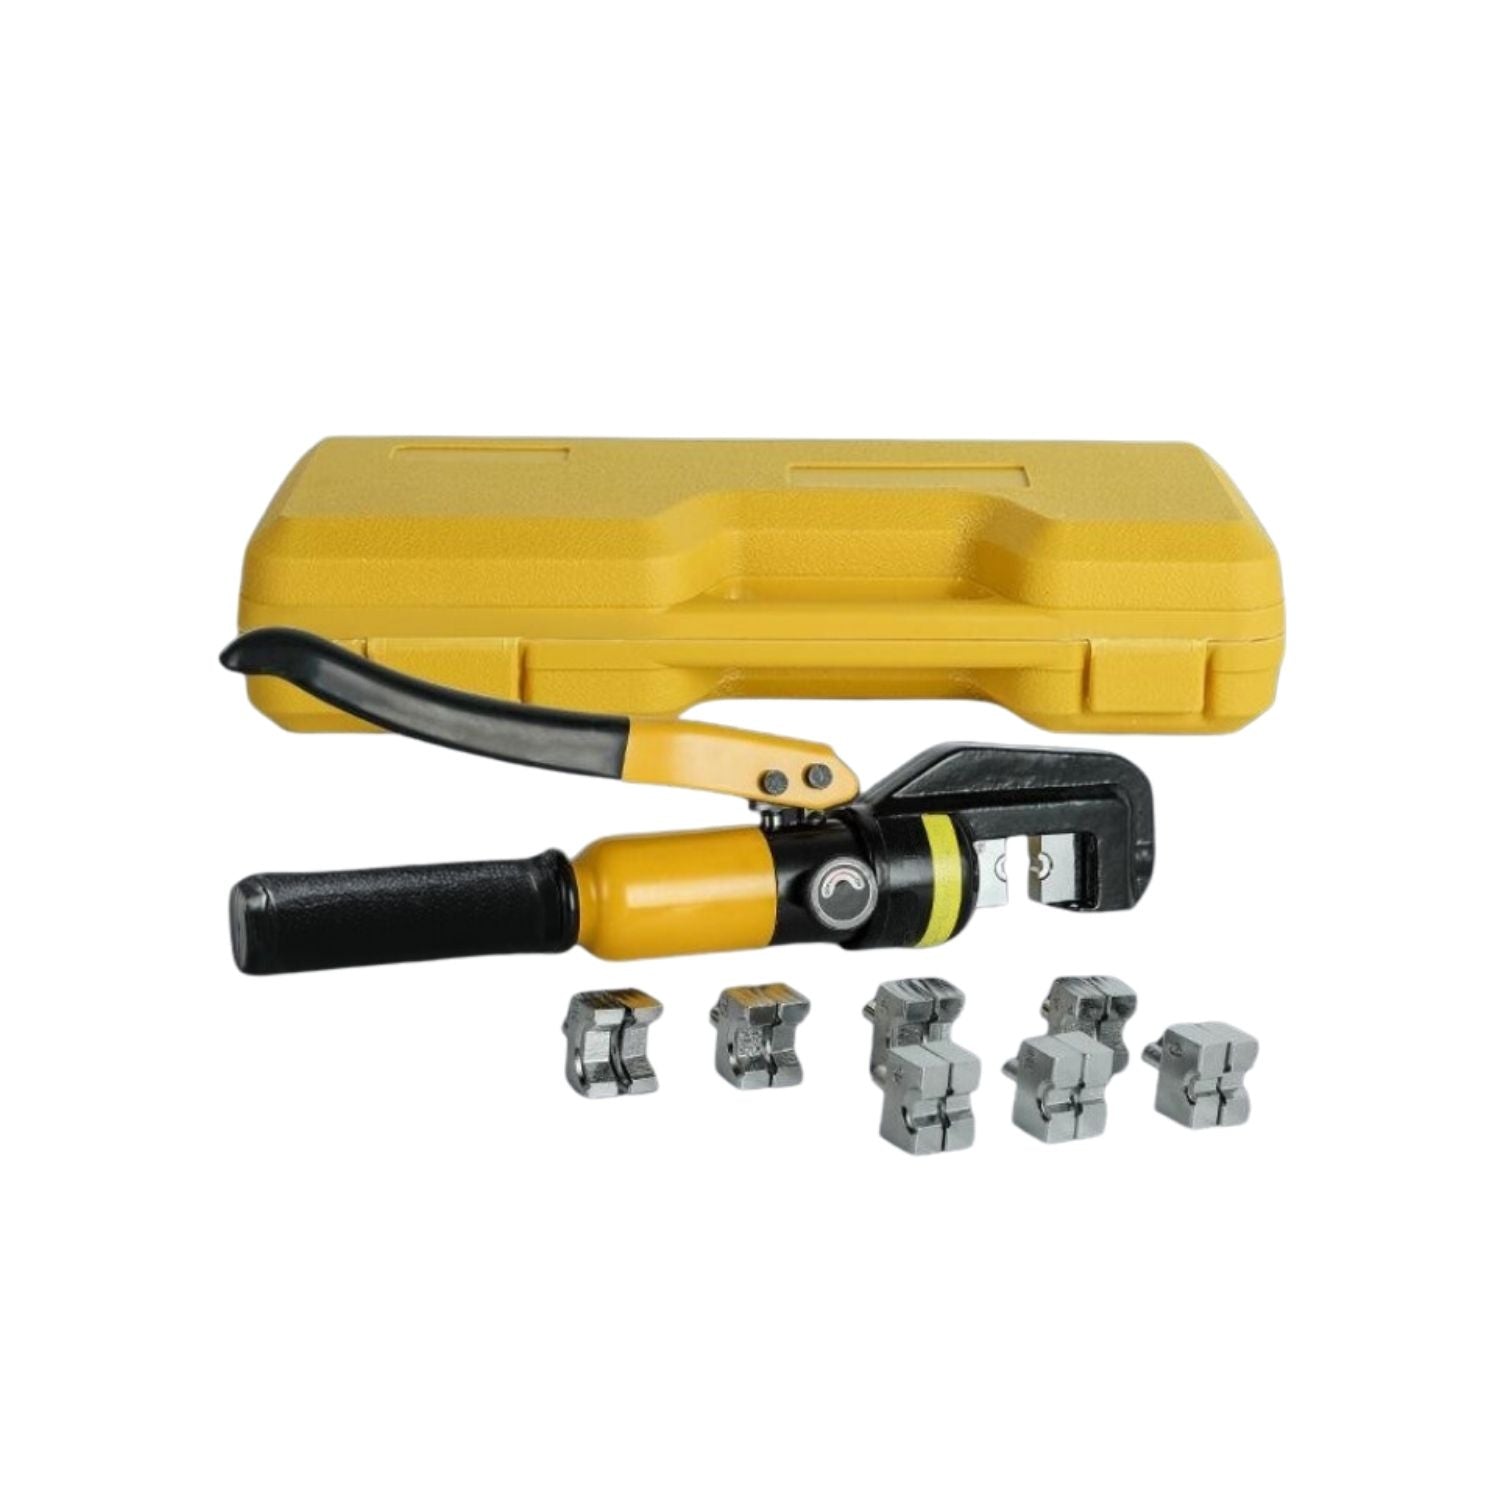 RYNOMATE 8 Ton Hydraulic Crimping Tool with 9 Dies( Yellow)